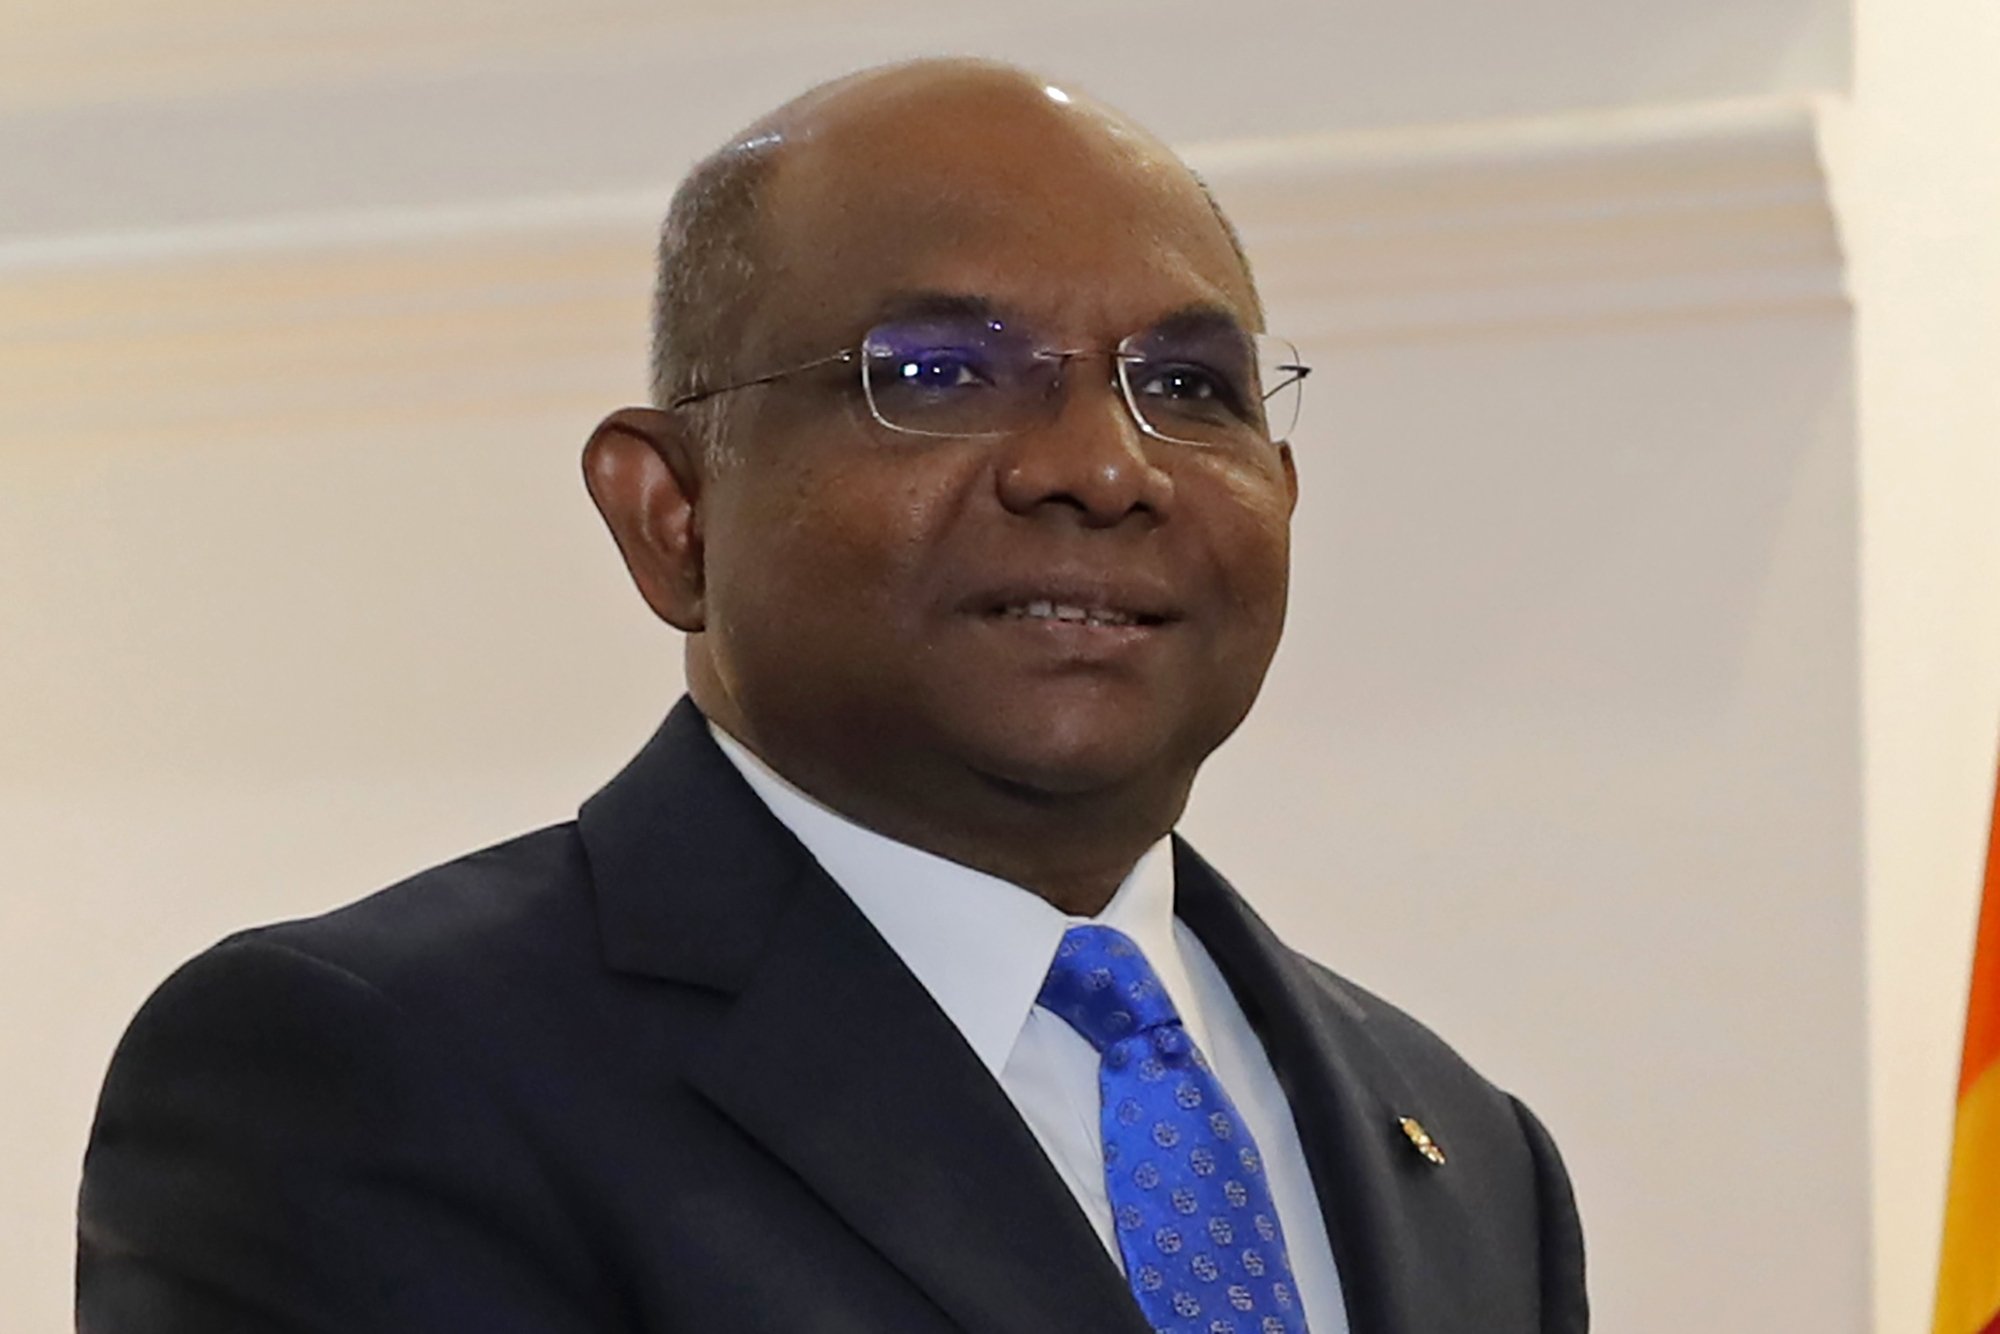 ‘We (India-Maldives) have good friendship that’s reaping benefits’, says Abdulla Shahid